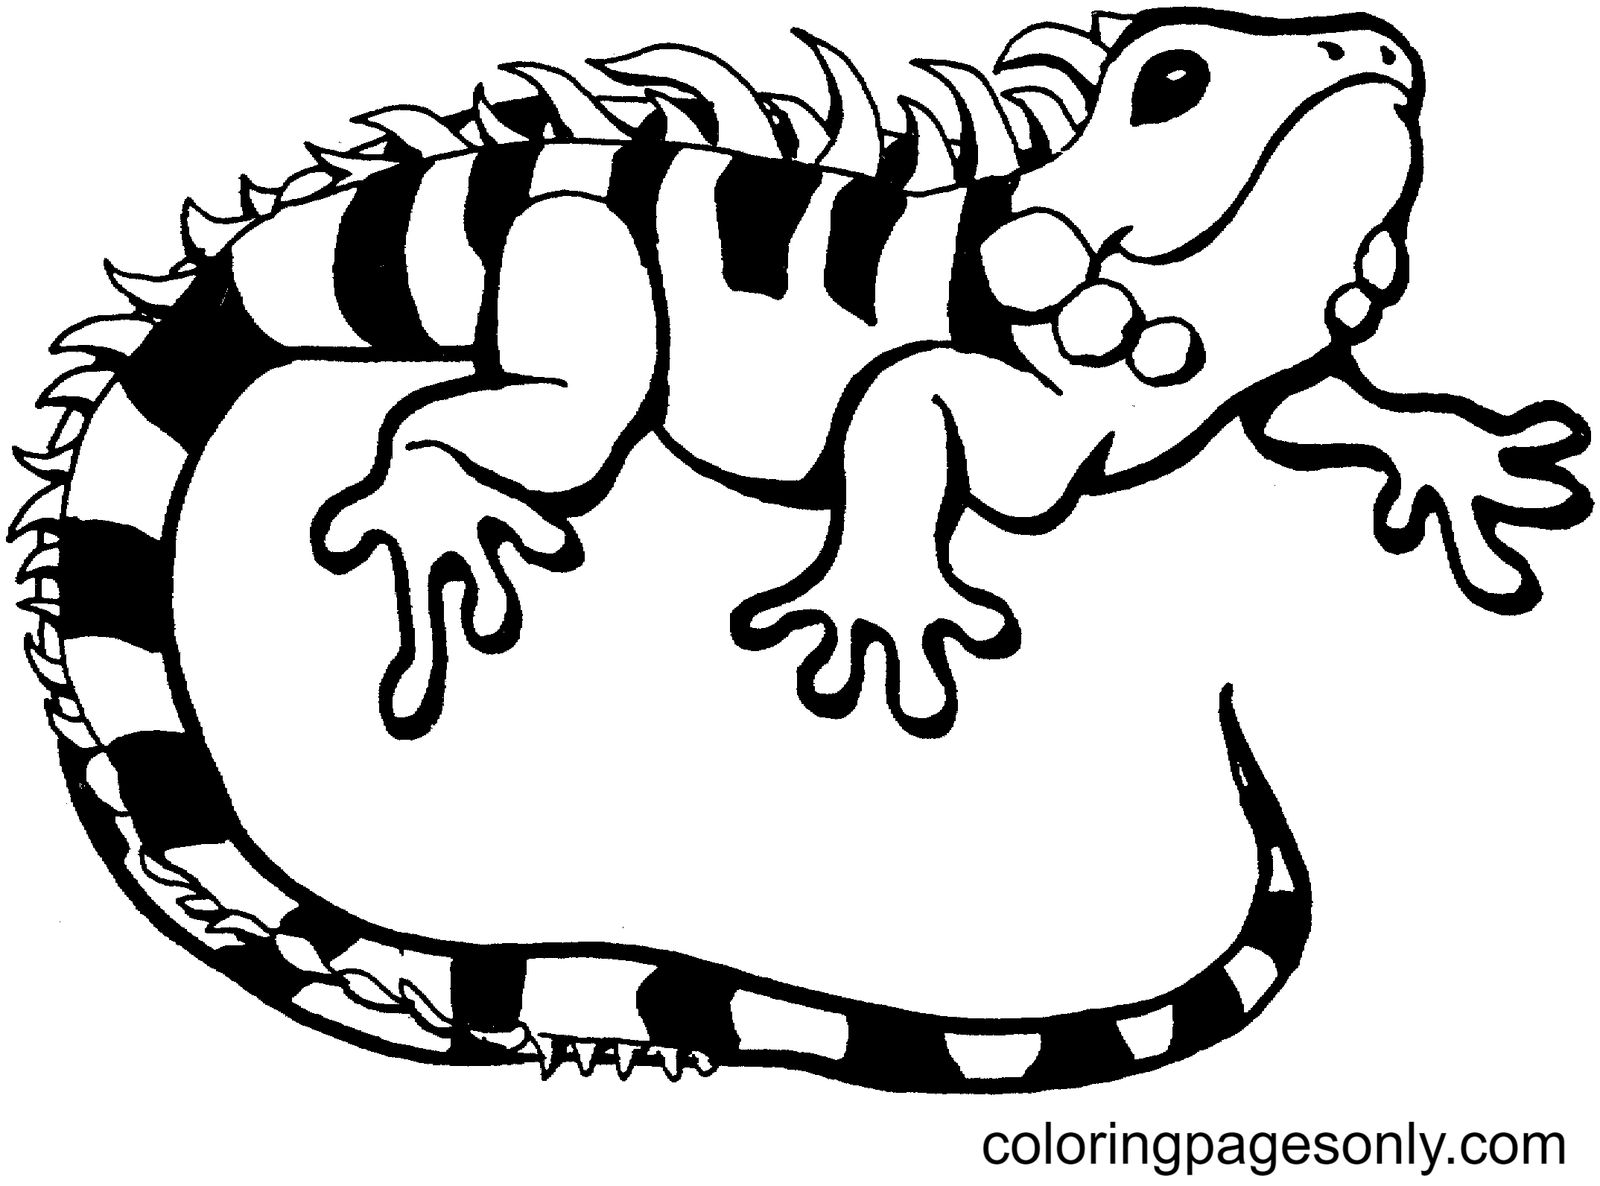 Lizards coloring pages - ClipArt Best